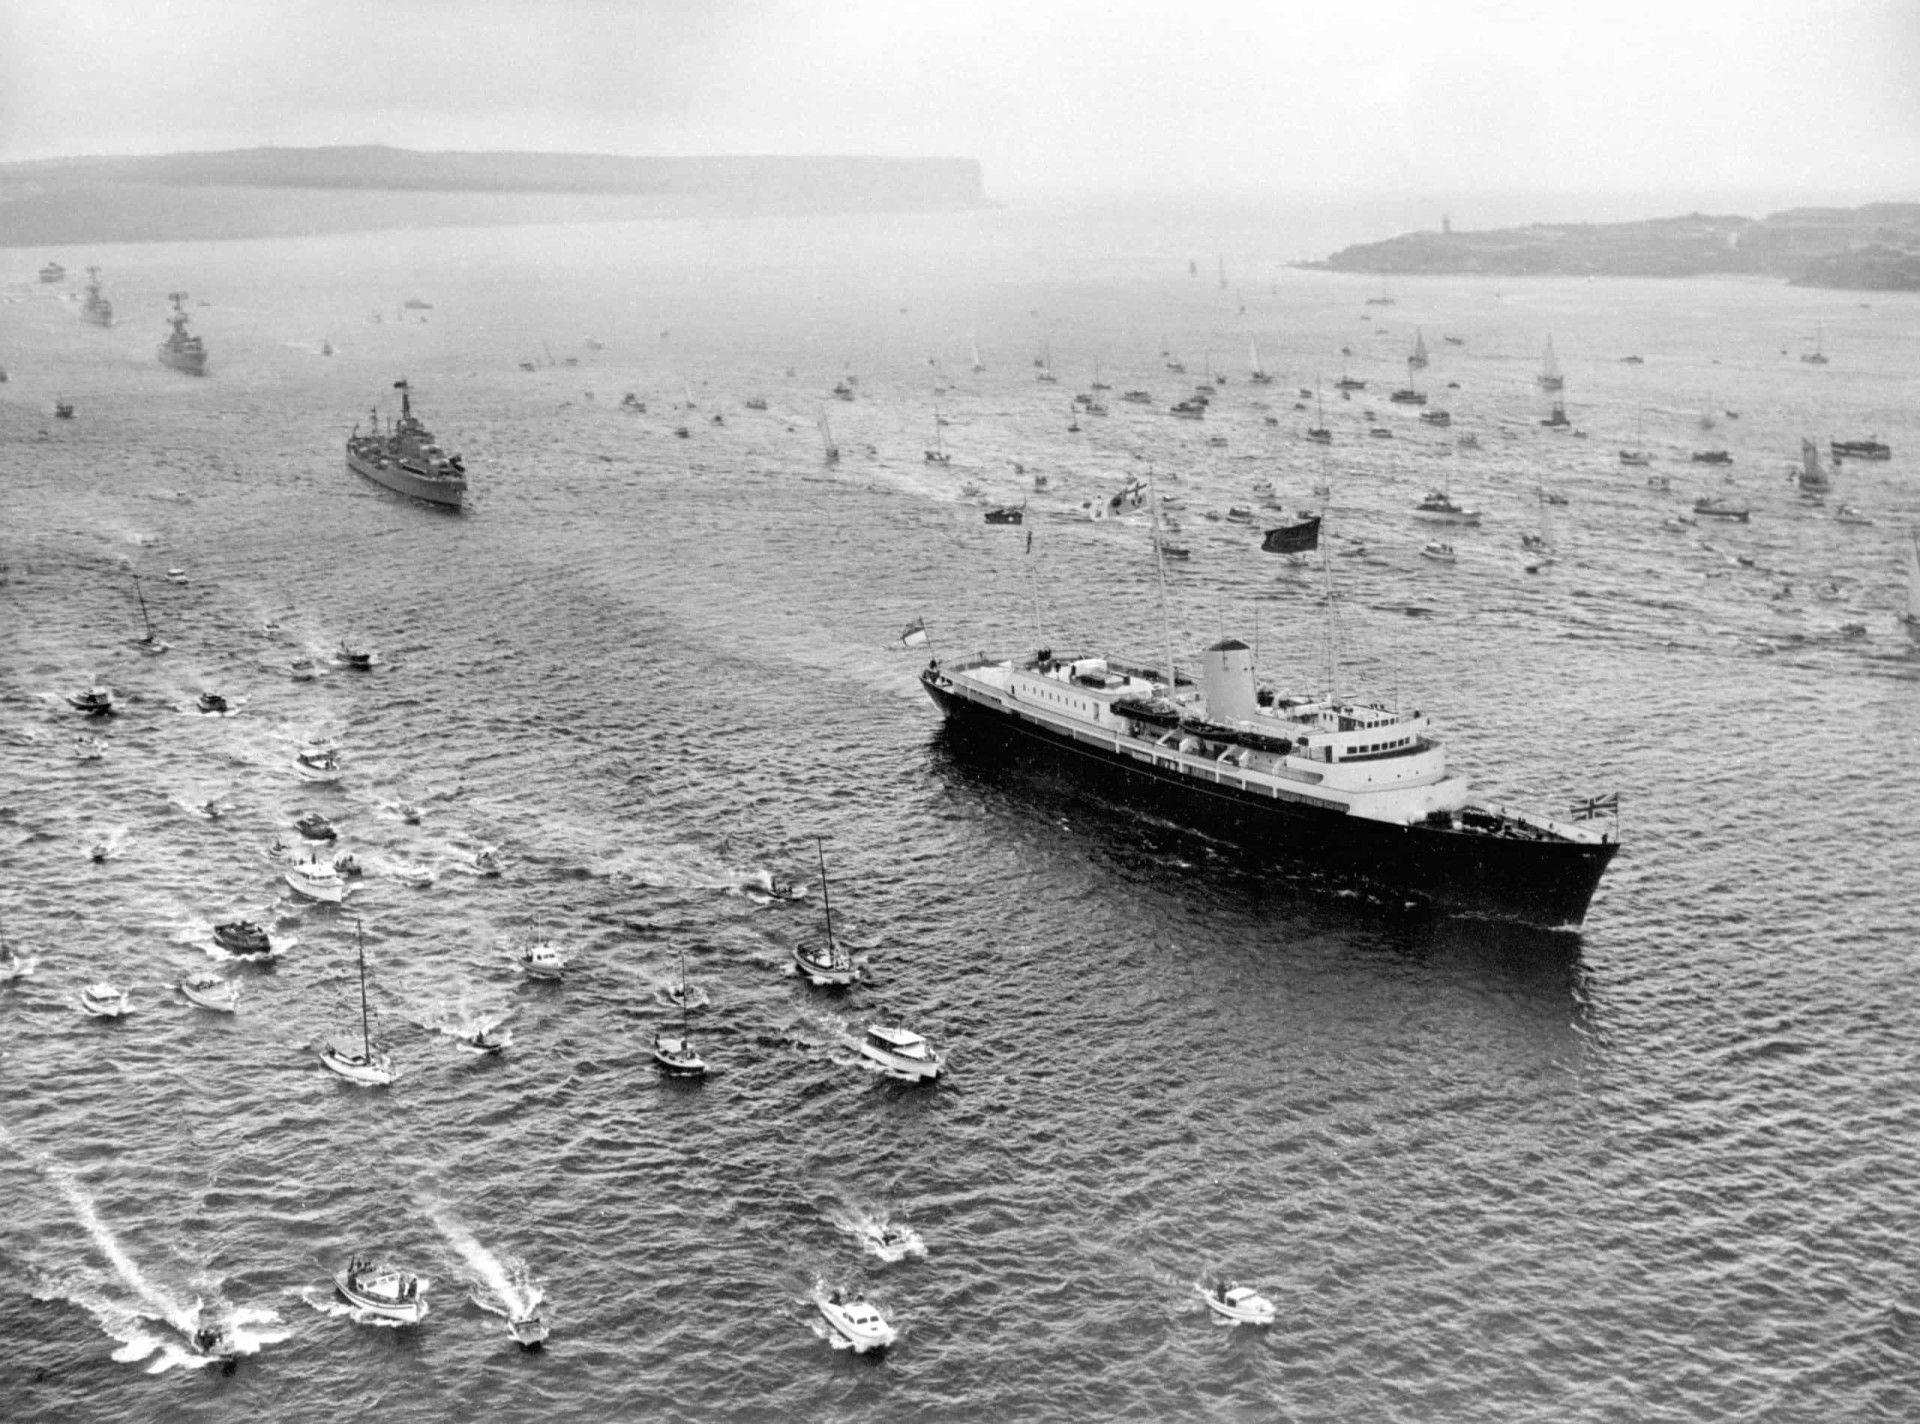 <p>Escorted by an armada of small craft, <em>Britannia</em>, bearing Queen Elizabeth II and the Duke of Edinburgh, arrives off Sydney Heads during their tour of Australia in 1963. Three escorting destroyers of the Royal Australian Navy follow in her wake.</p><p>You may also like:<a href="https://www.starsinsider.com/n/291814?utm_source=msn.com&utm_medium=display&utm_campaign=referral_description&utm_content=474709v3en-ph"> Social situations that introverts dread</a></p>